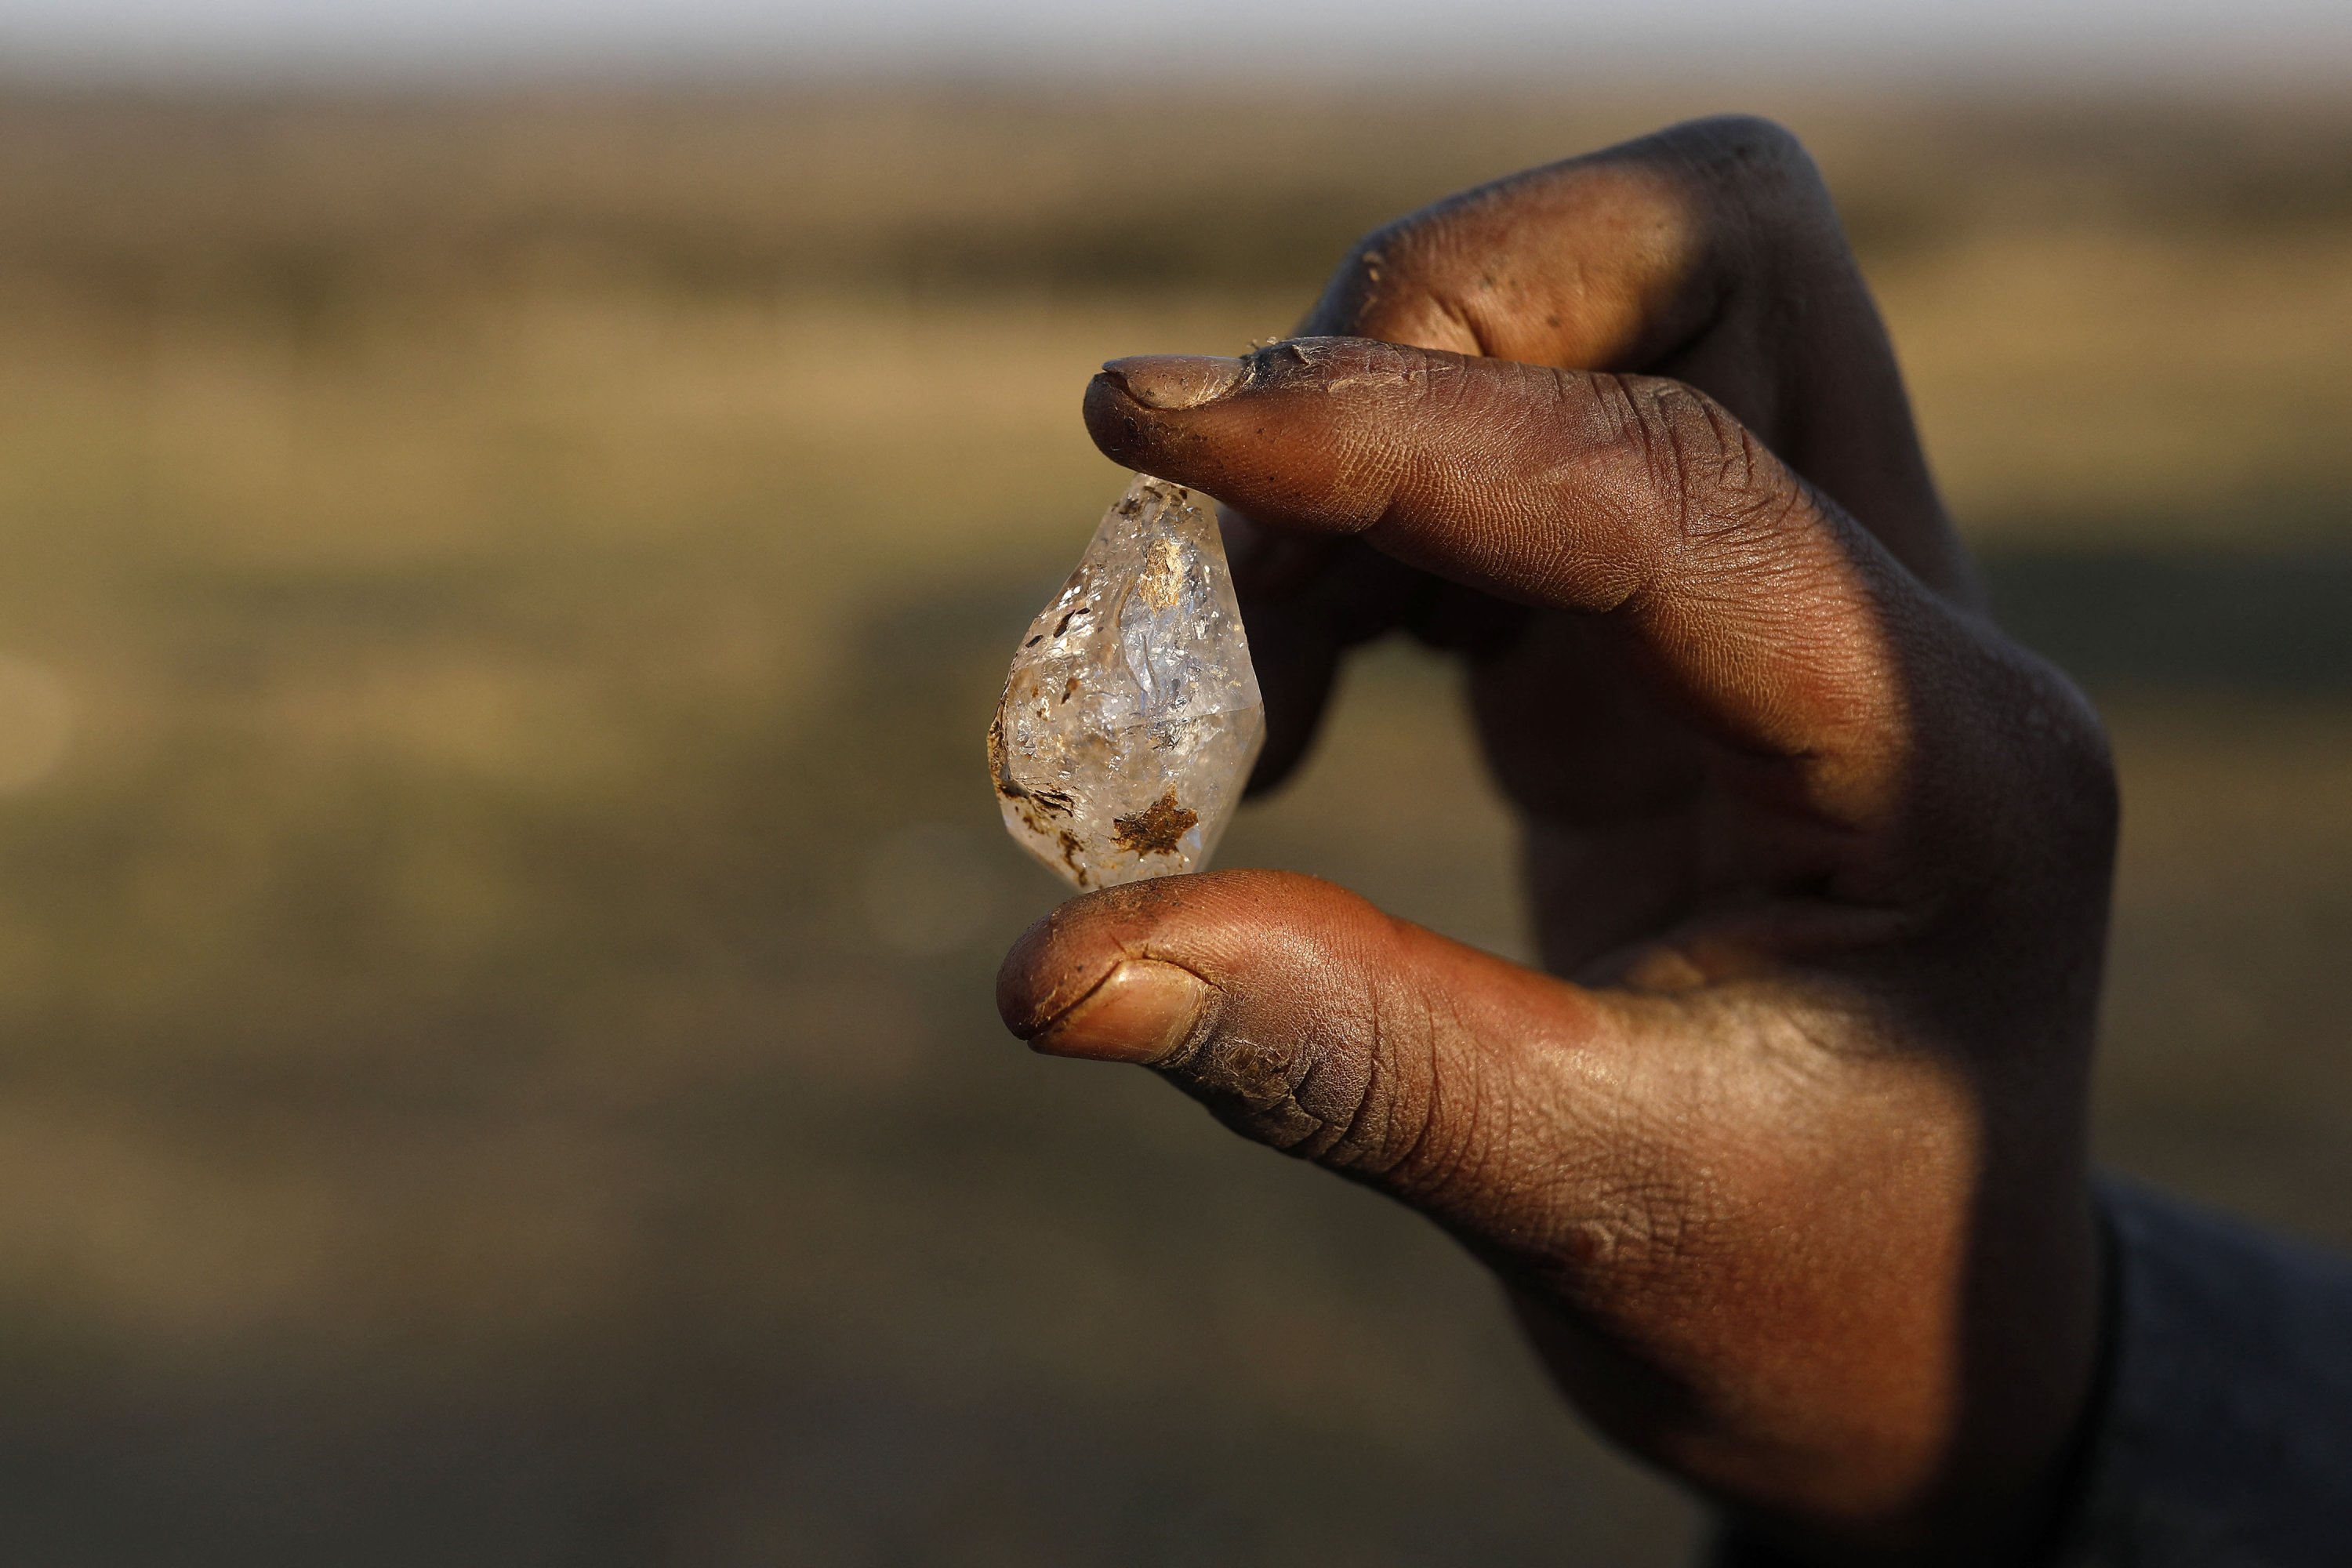 A boy holds what he believes to be a diamond in KwaHlathi village near Ladysmith in KwaZulu Natal, South Africa, June 15, 2021. (AFP Photo)